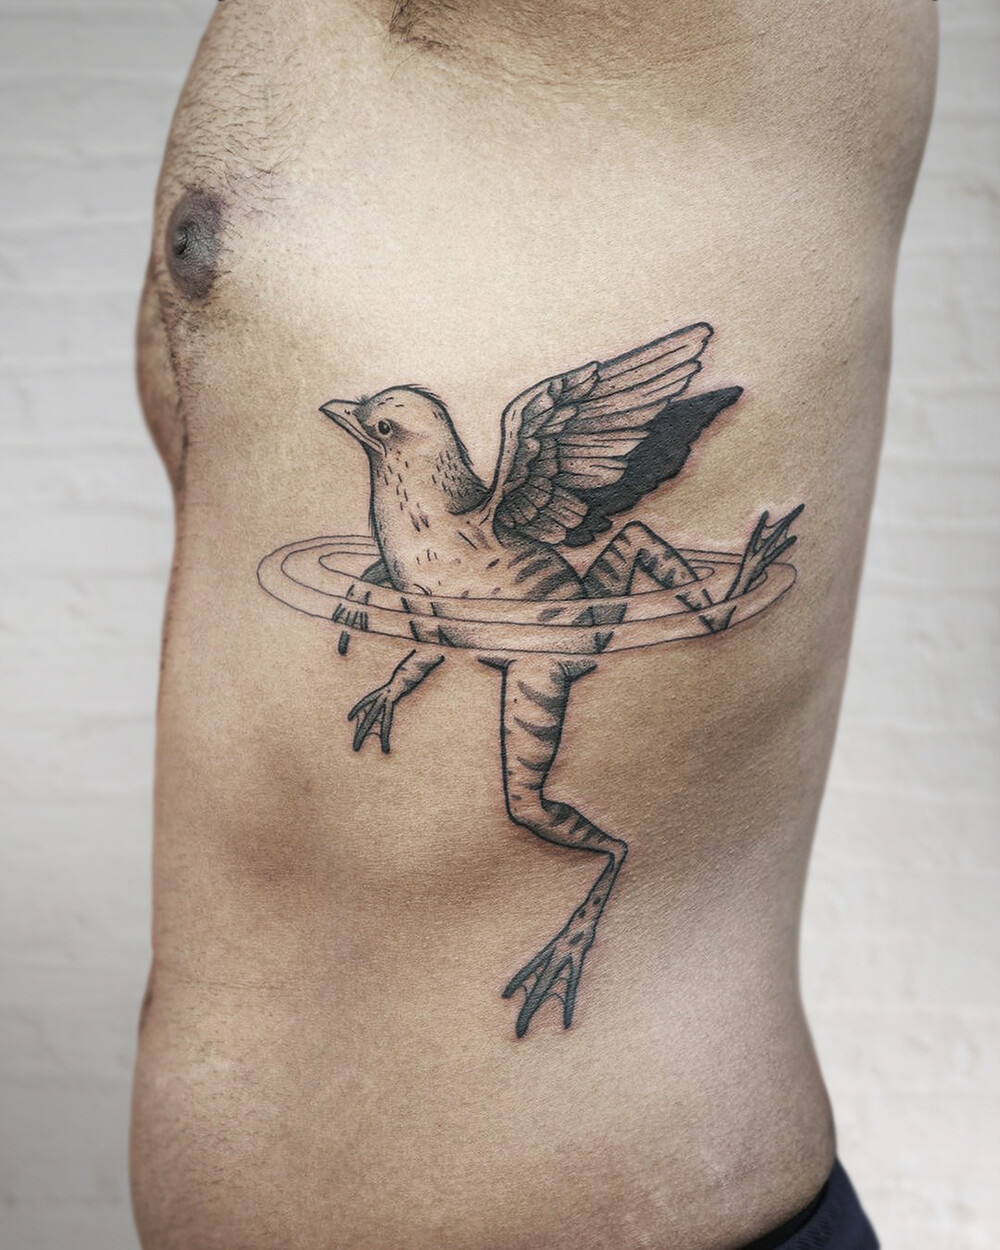 Tattoo of a bird frog which is a frog with wings on the ribs ribcage by Christian Eisenhofer - chimera frogtattoo birdtattoo berlintattoo blackwork dotwork abstracttattoo - Studio Sturmfrei Tattoo Berlin